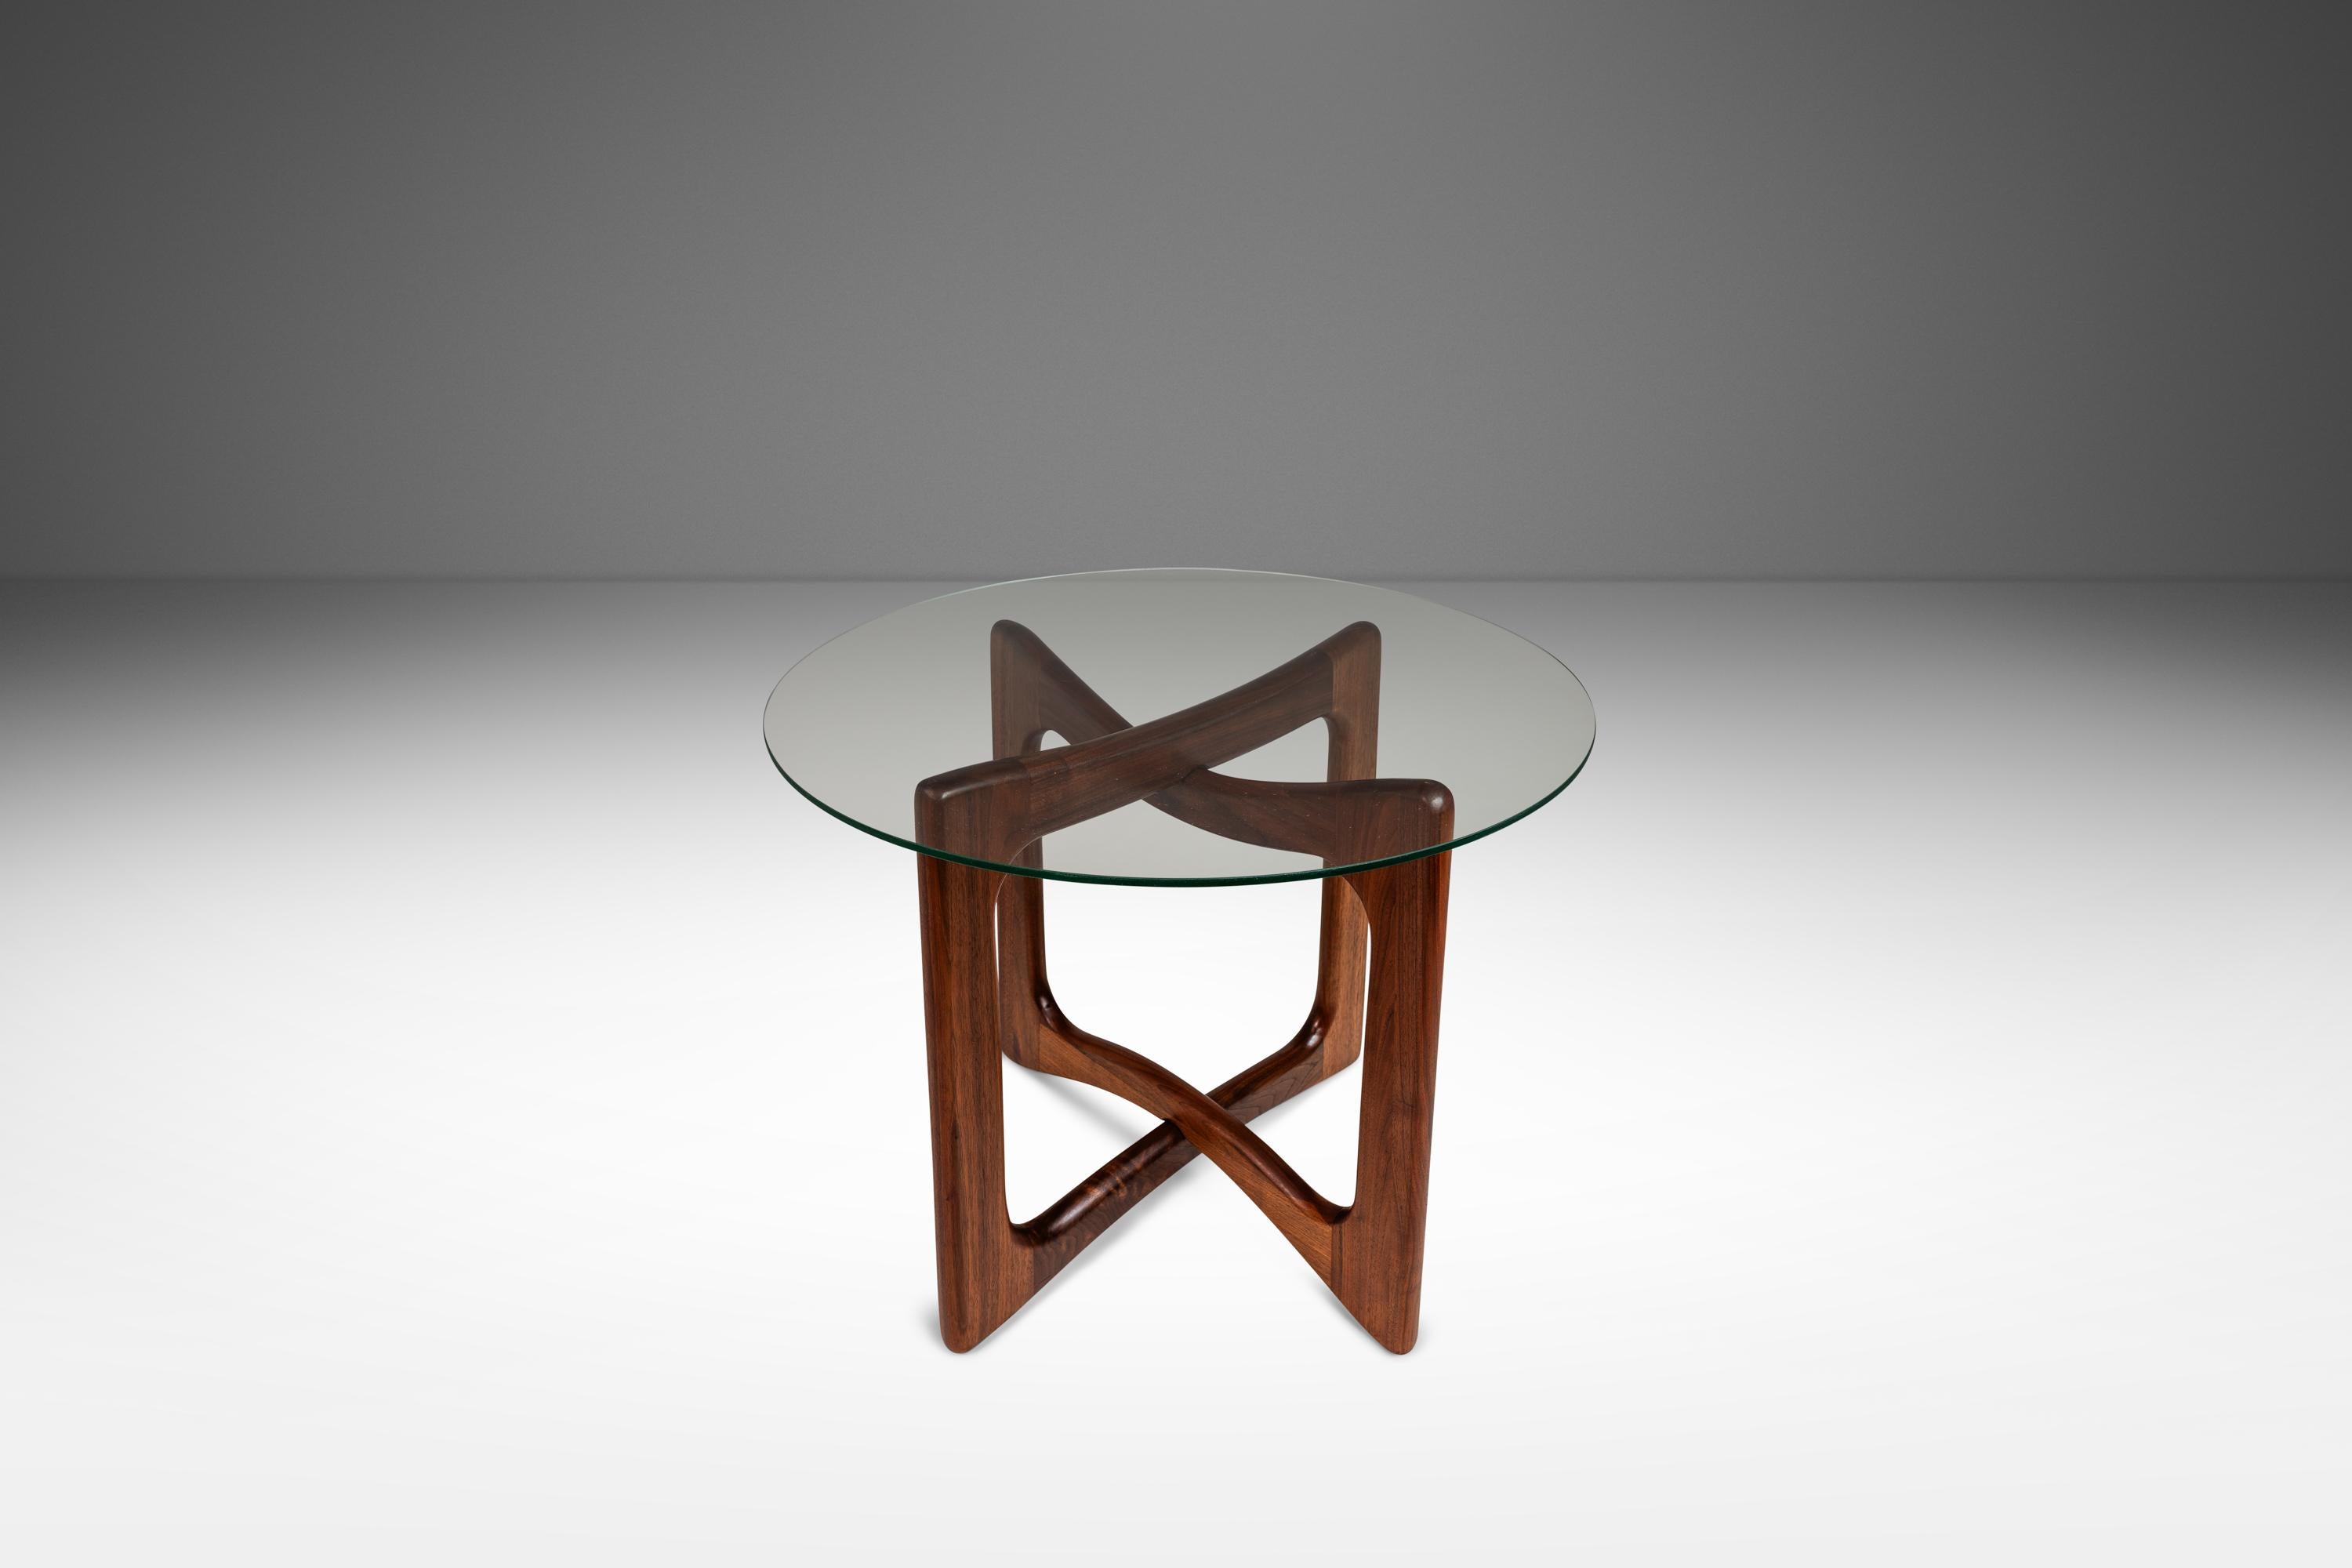 Introducing a newly restored side table designed by the incomparable Adrian Pearsall in the late 1950's and crafted by Craft Associates in the early 1960's. Featuring a base made from solid black American walnut with extraordinary woodgrains this